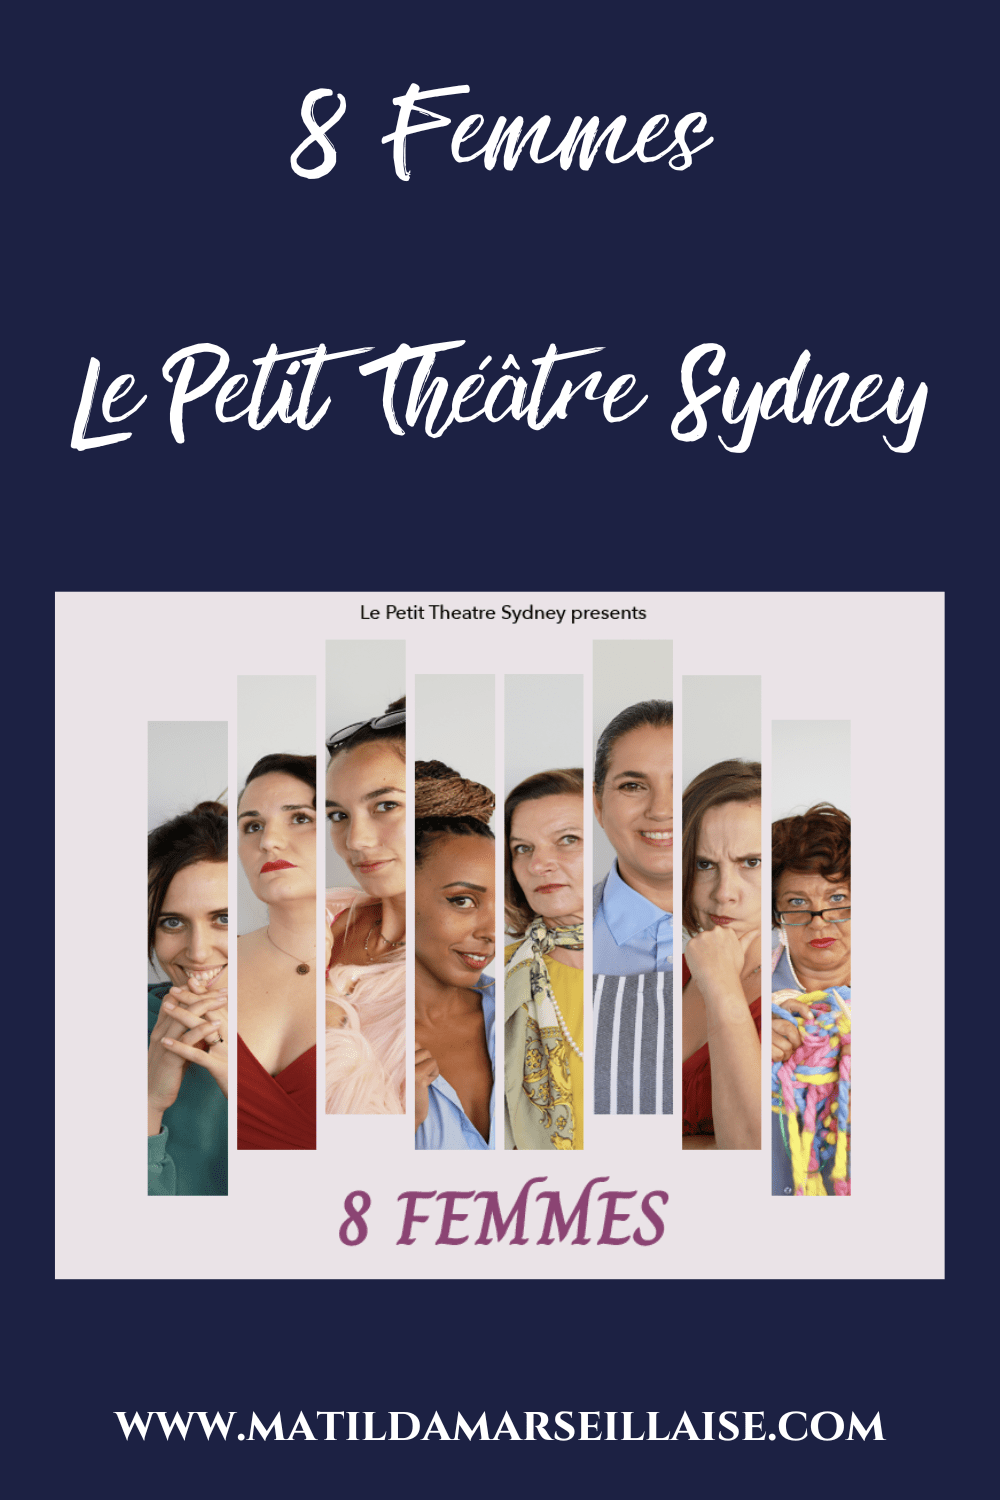 Le Petit Theatre Sydney will present 8 Femmes this May